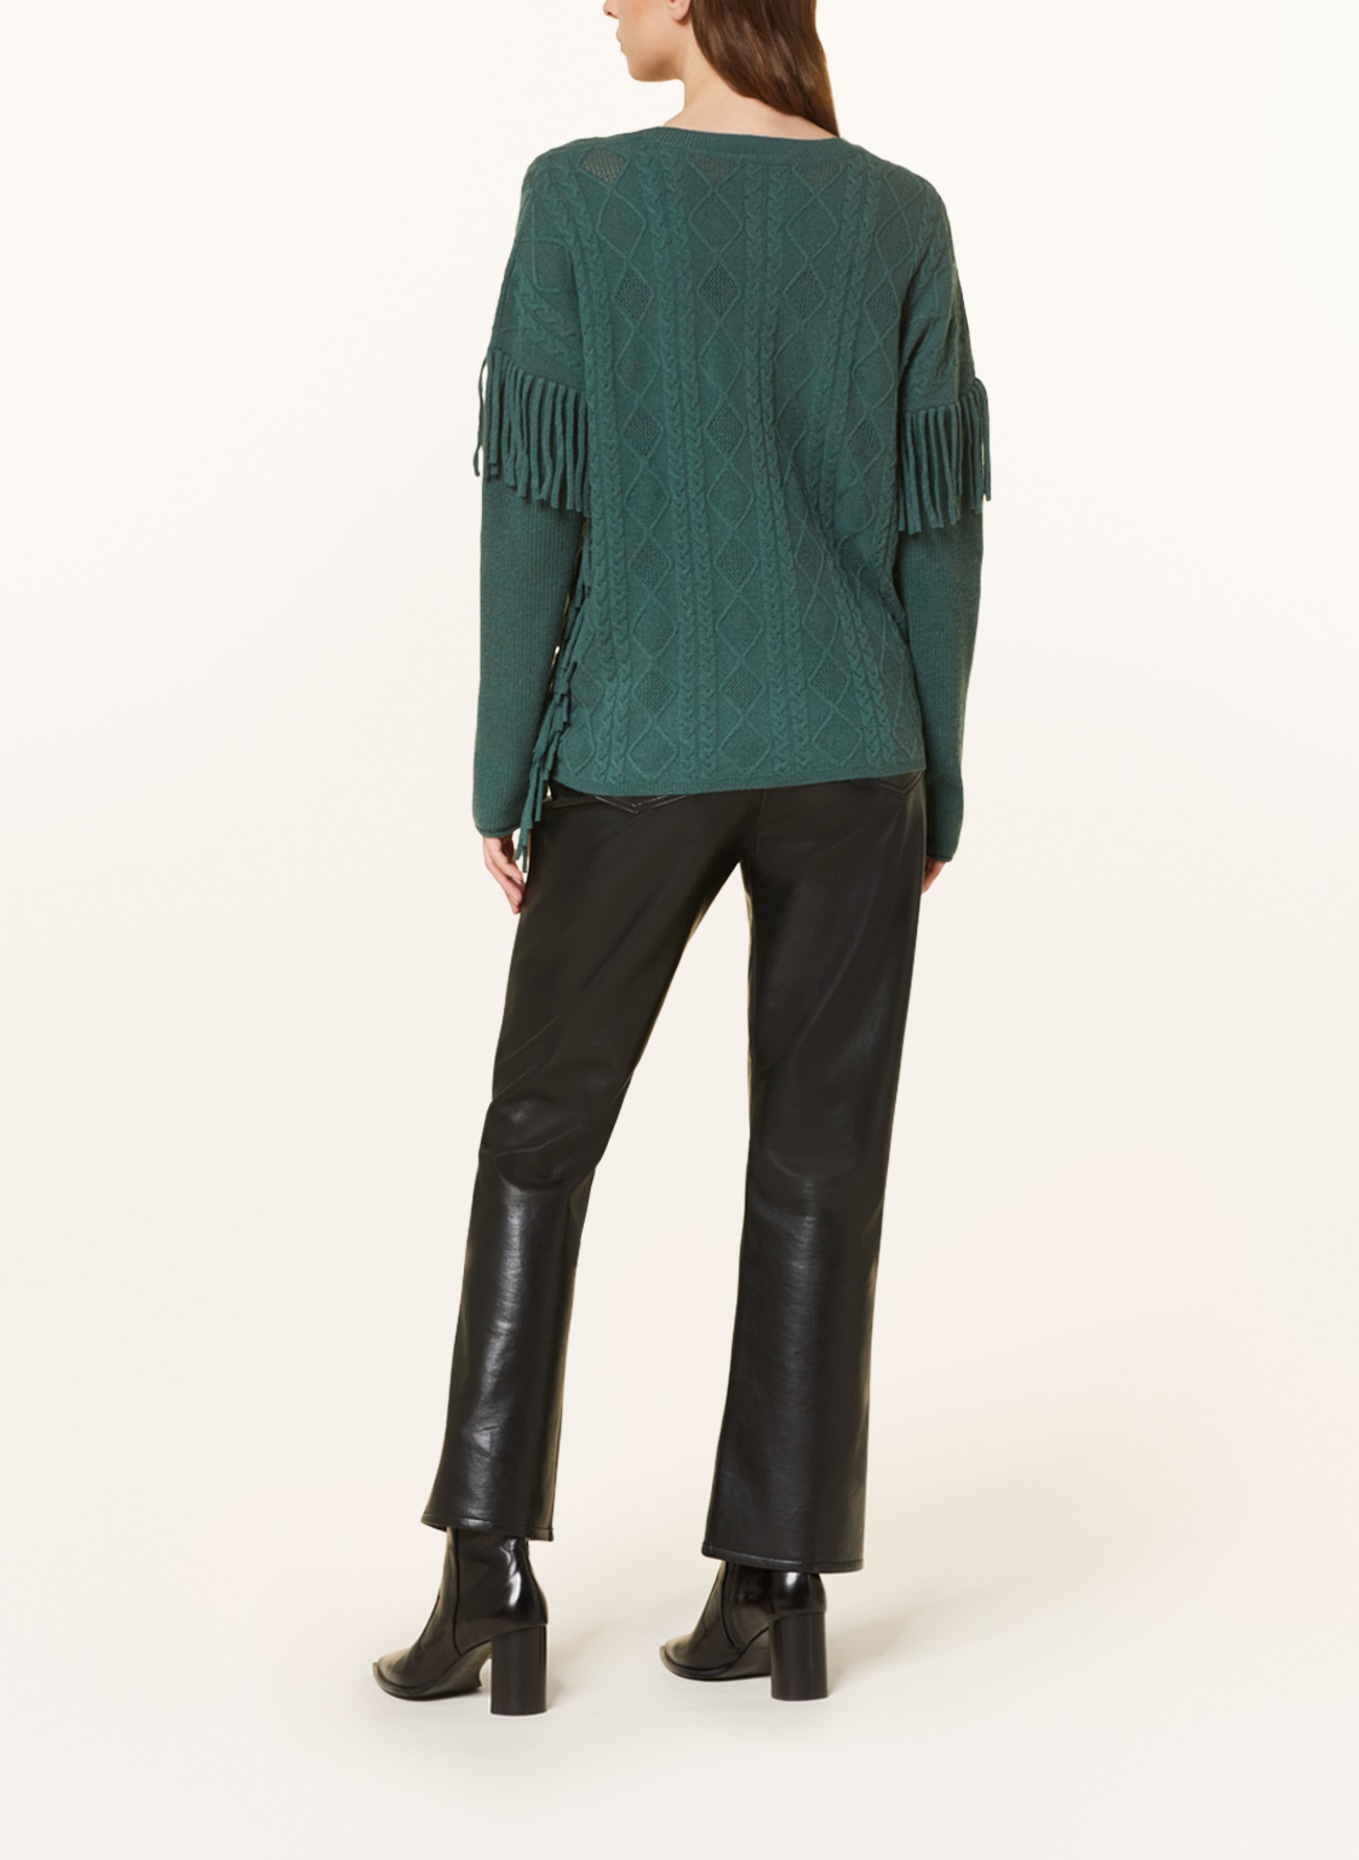 Princess GOES HOLLYWOOD Oversized sweater, Color: DARK GREEN (Image 3)